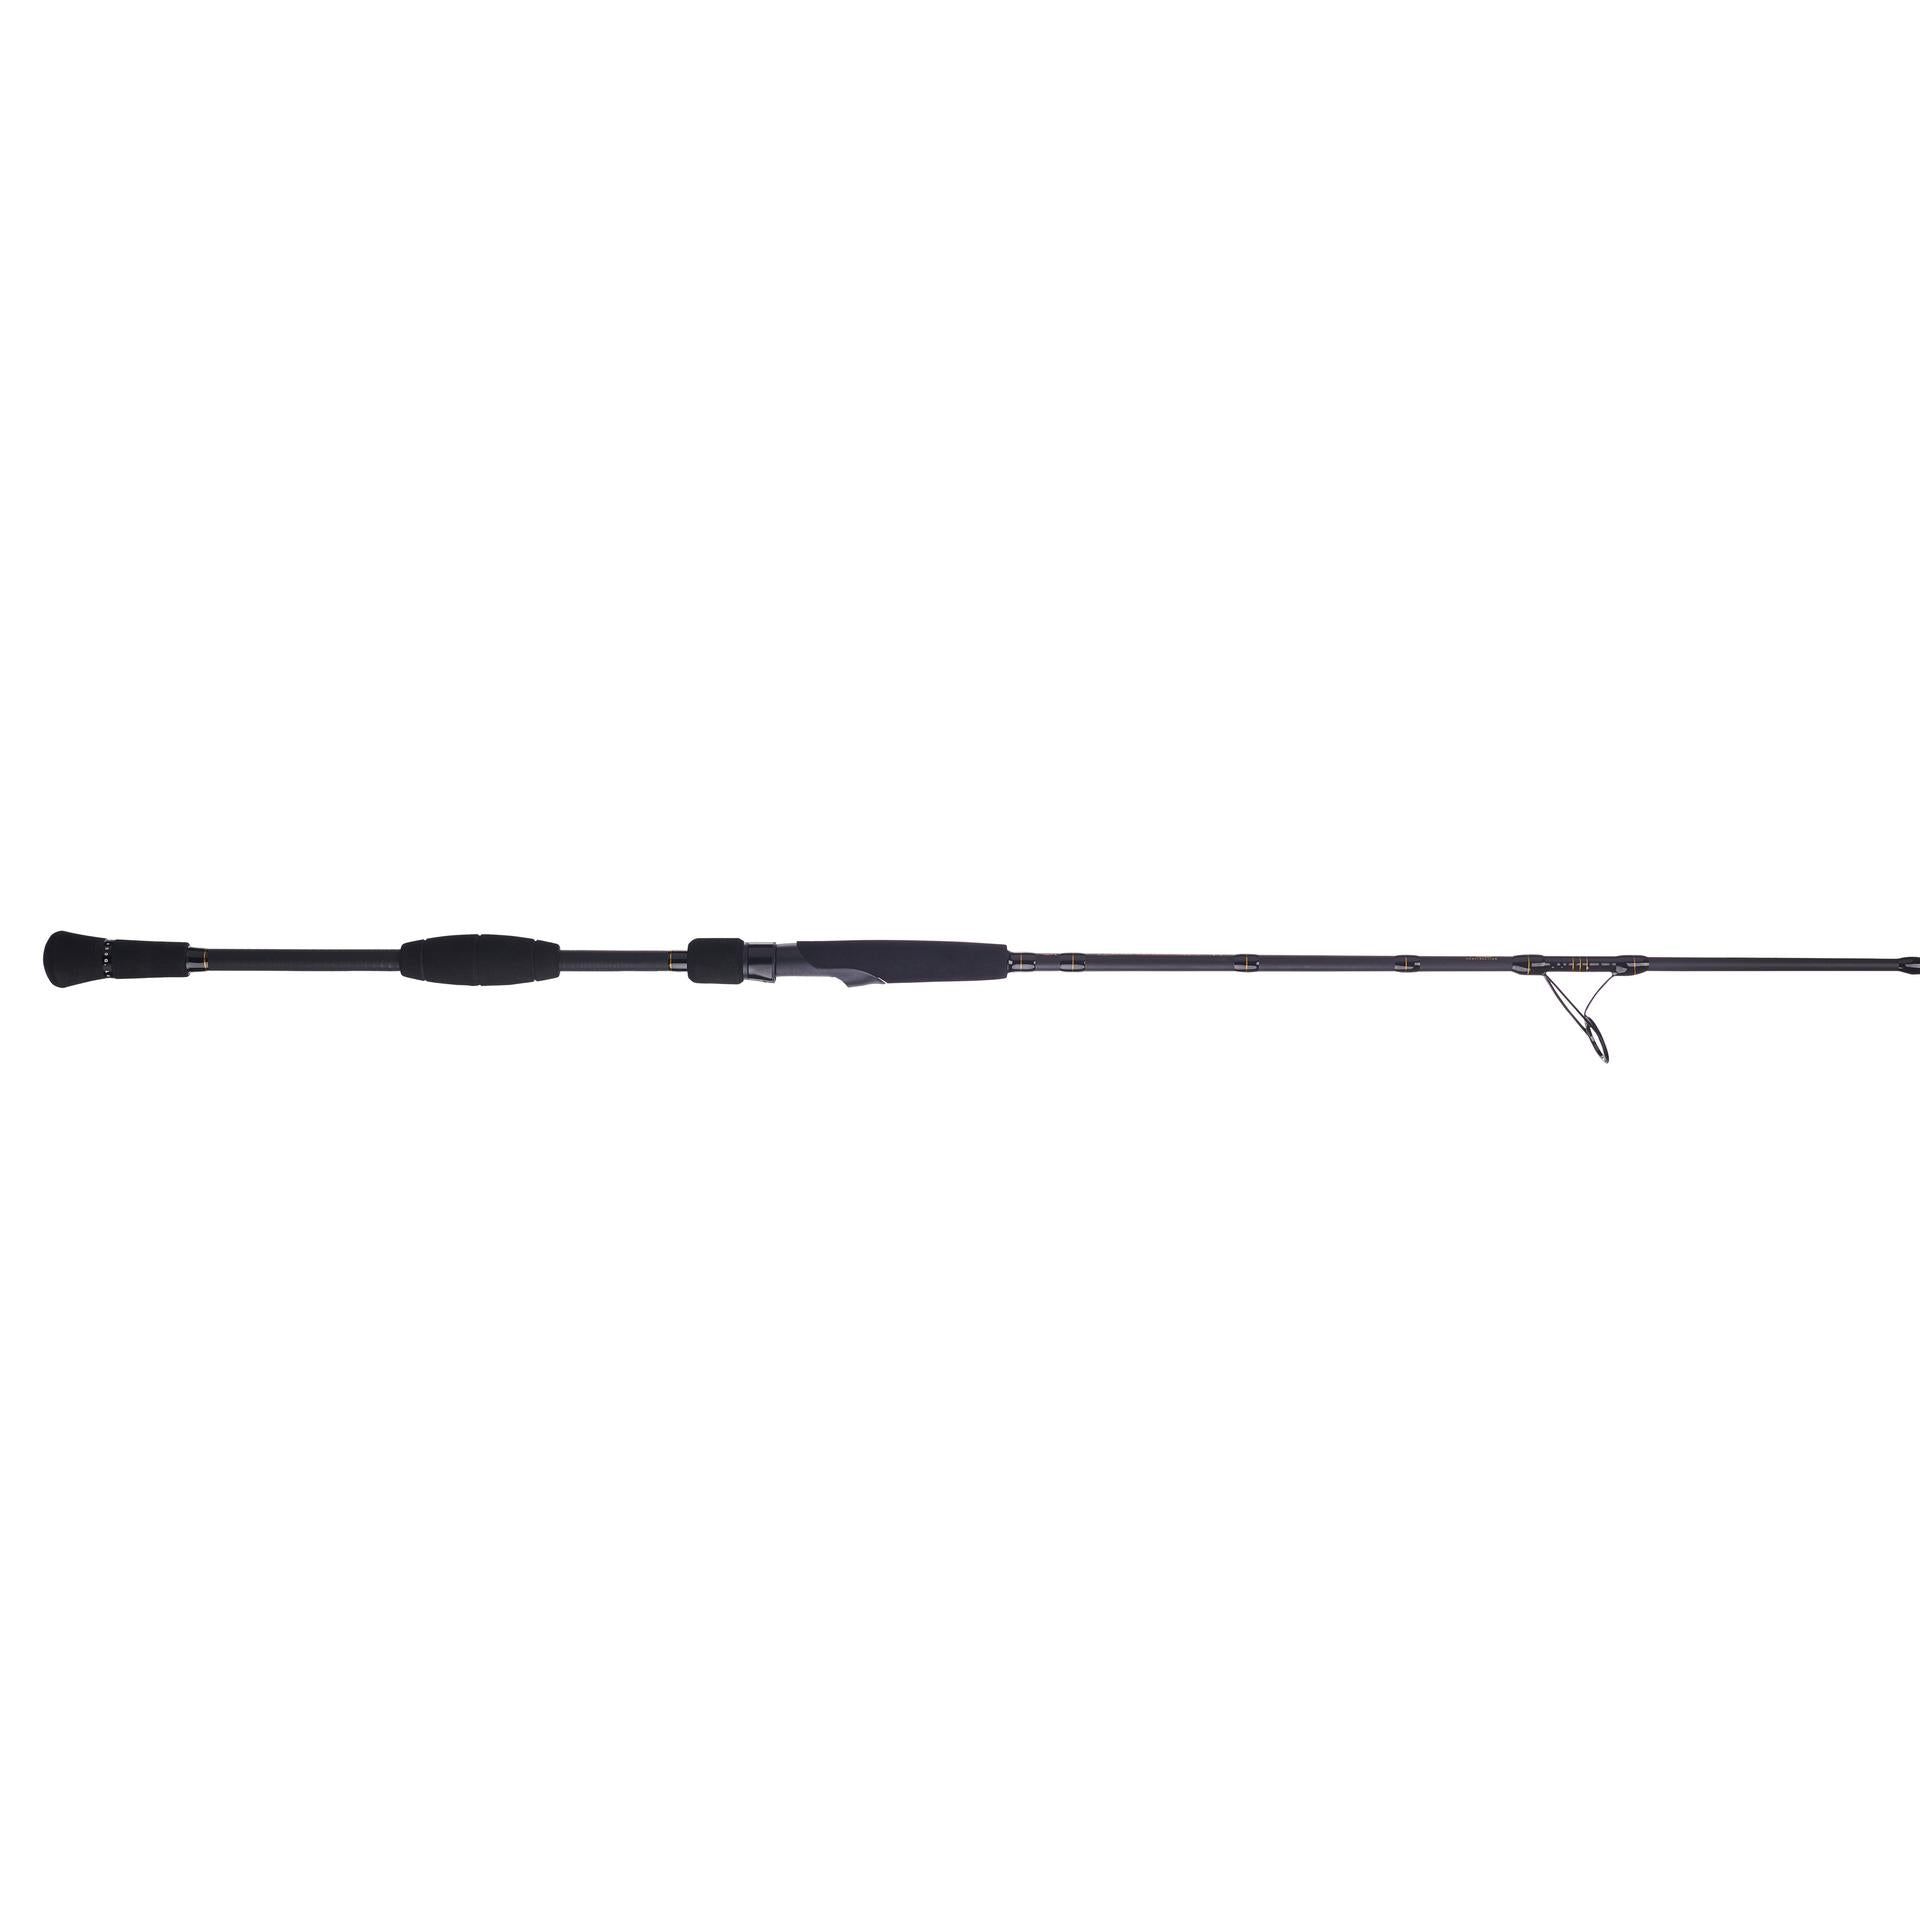 Battalion™ II Slow Pitch Spinning Rod